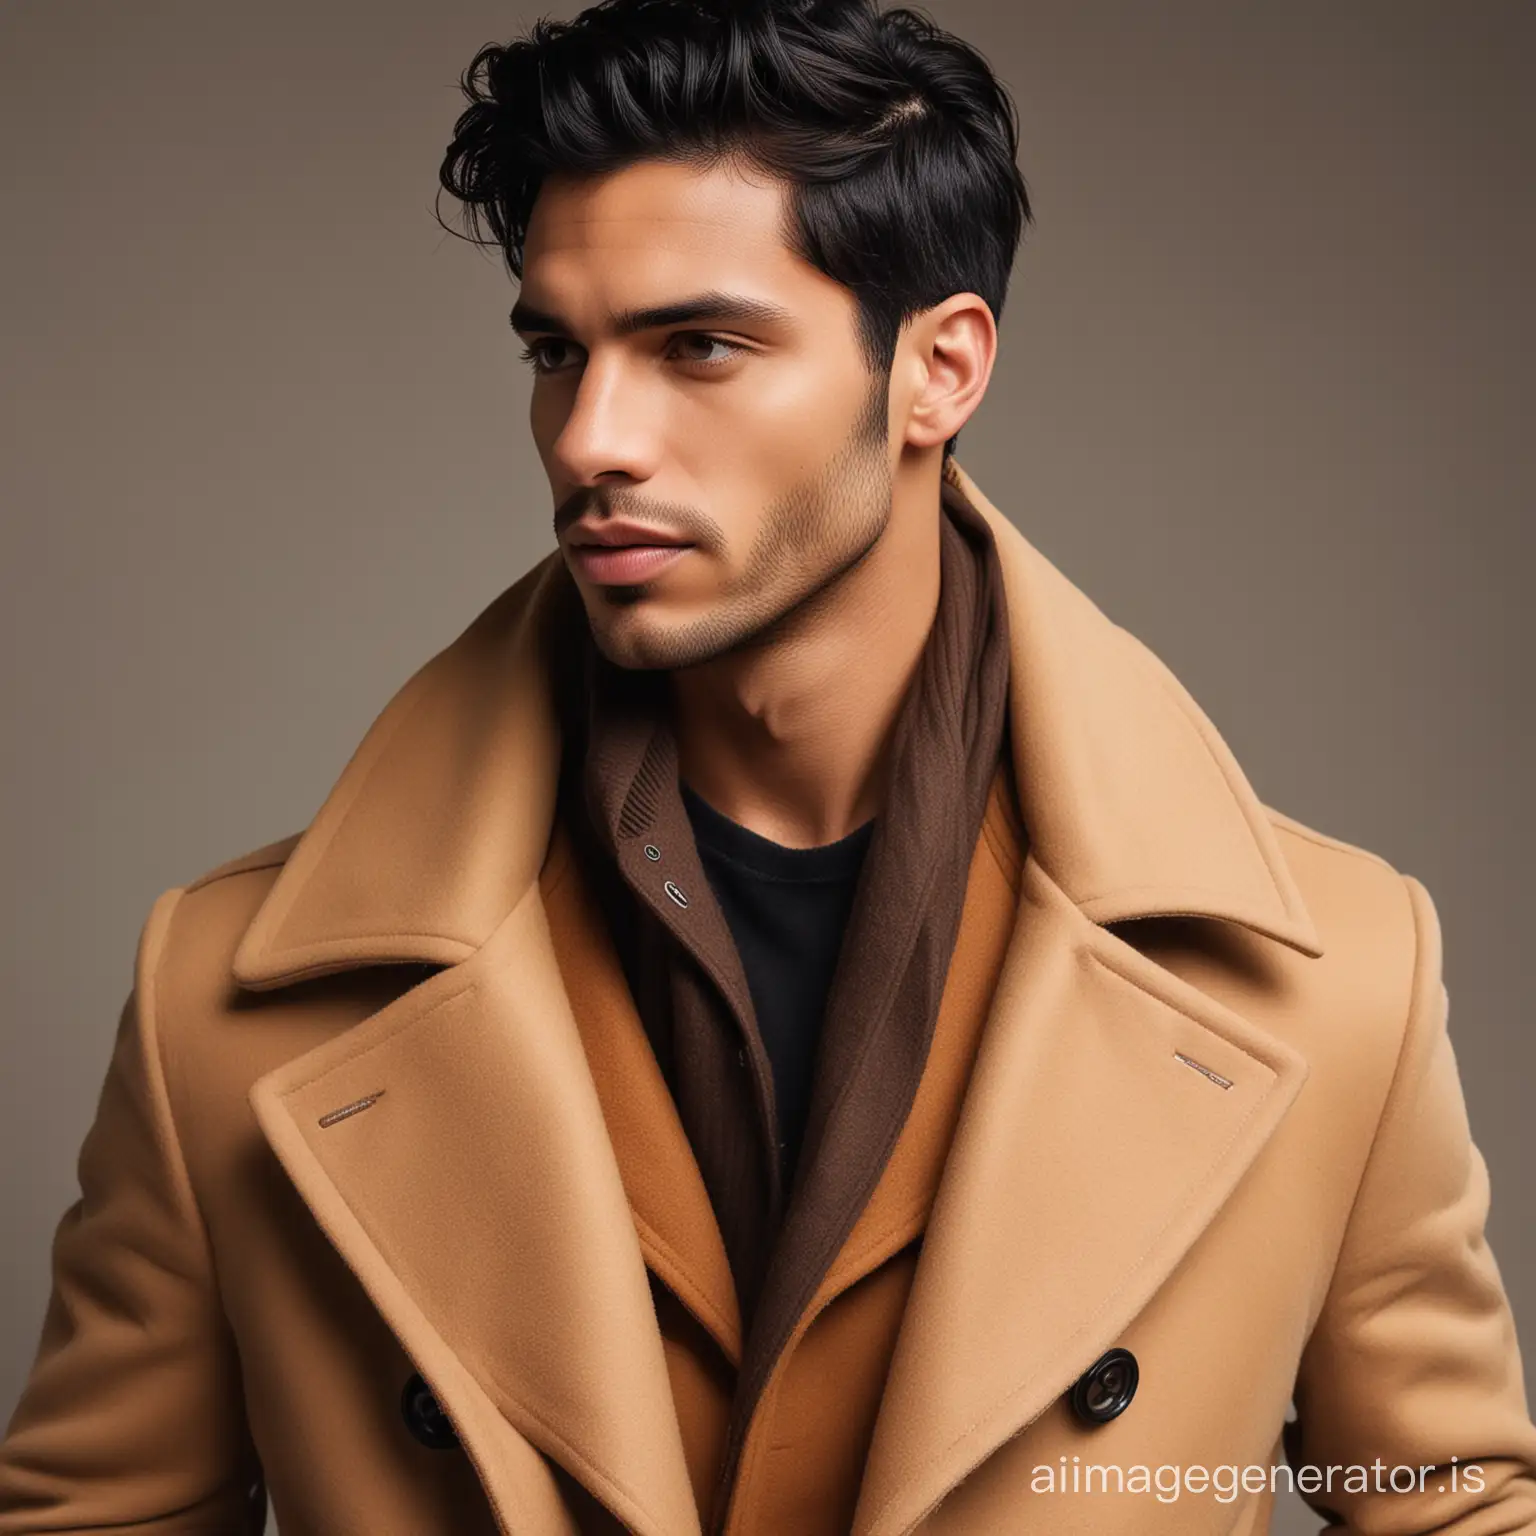 Stylish-Man-in-Brown-Coat-with-Black-Hair-Fashion-Portrait